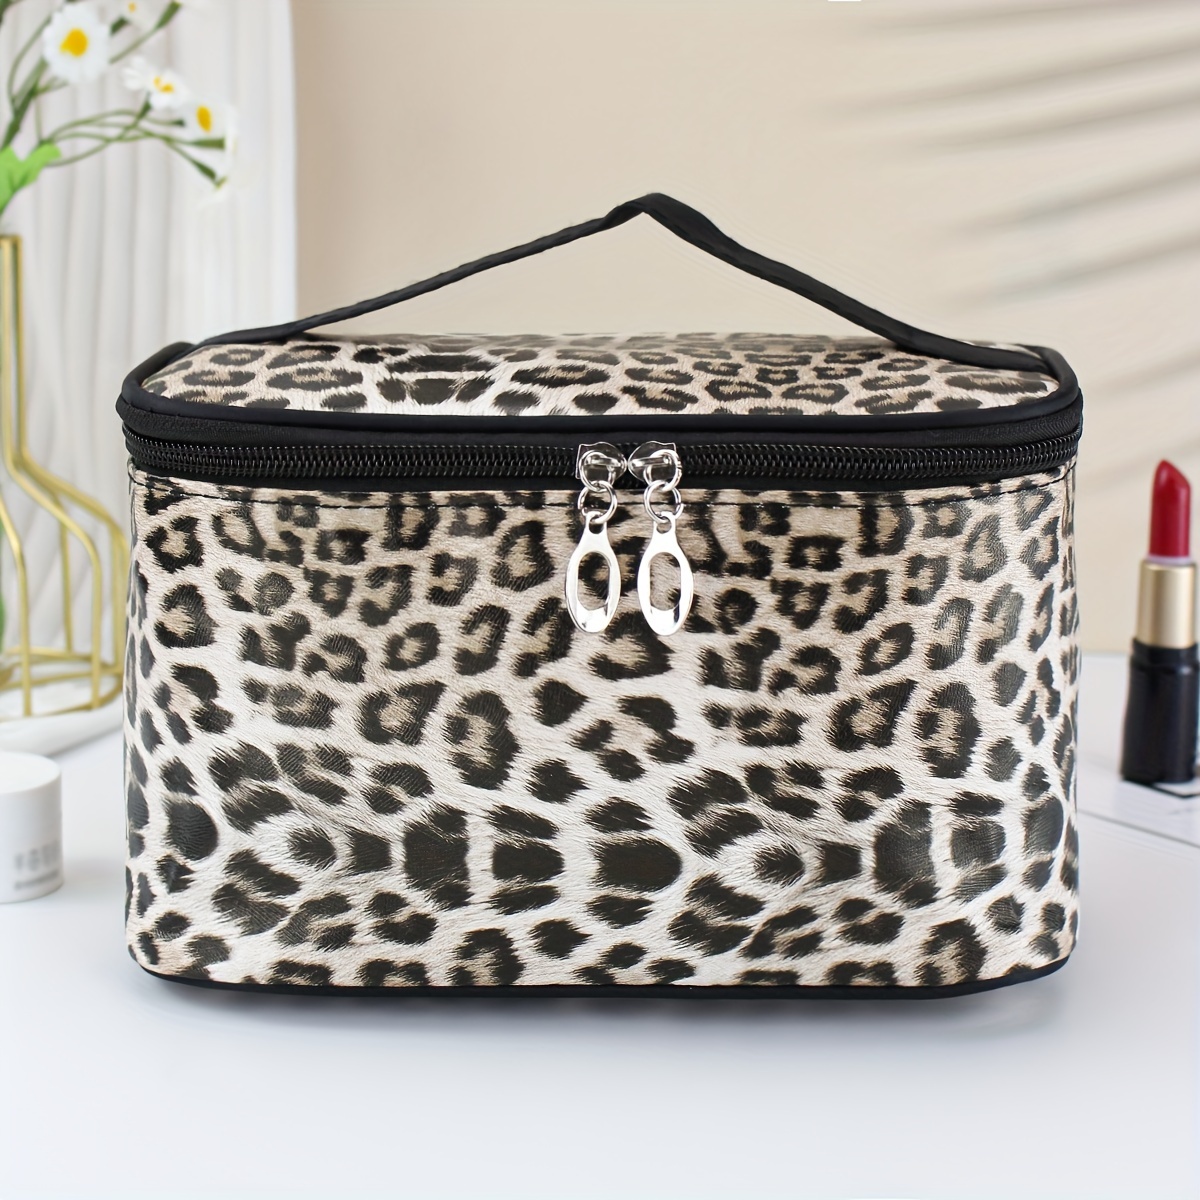 

Leopard Print Cosmetic Bag, Large Capacity, Square Pouch Organizer For Home And Travel Use, Fashionable Makeup Storage With Handle